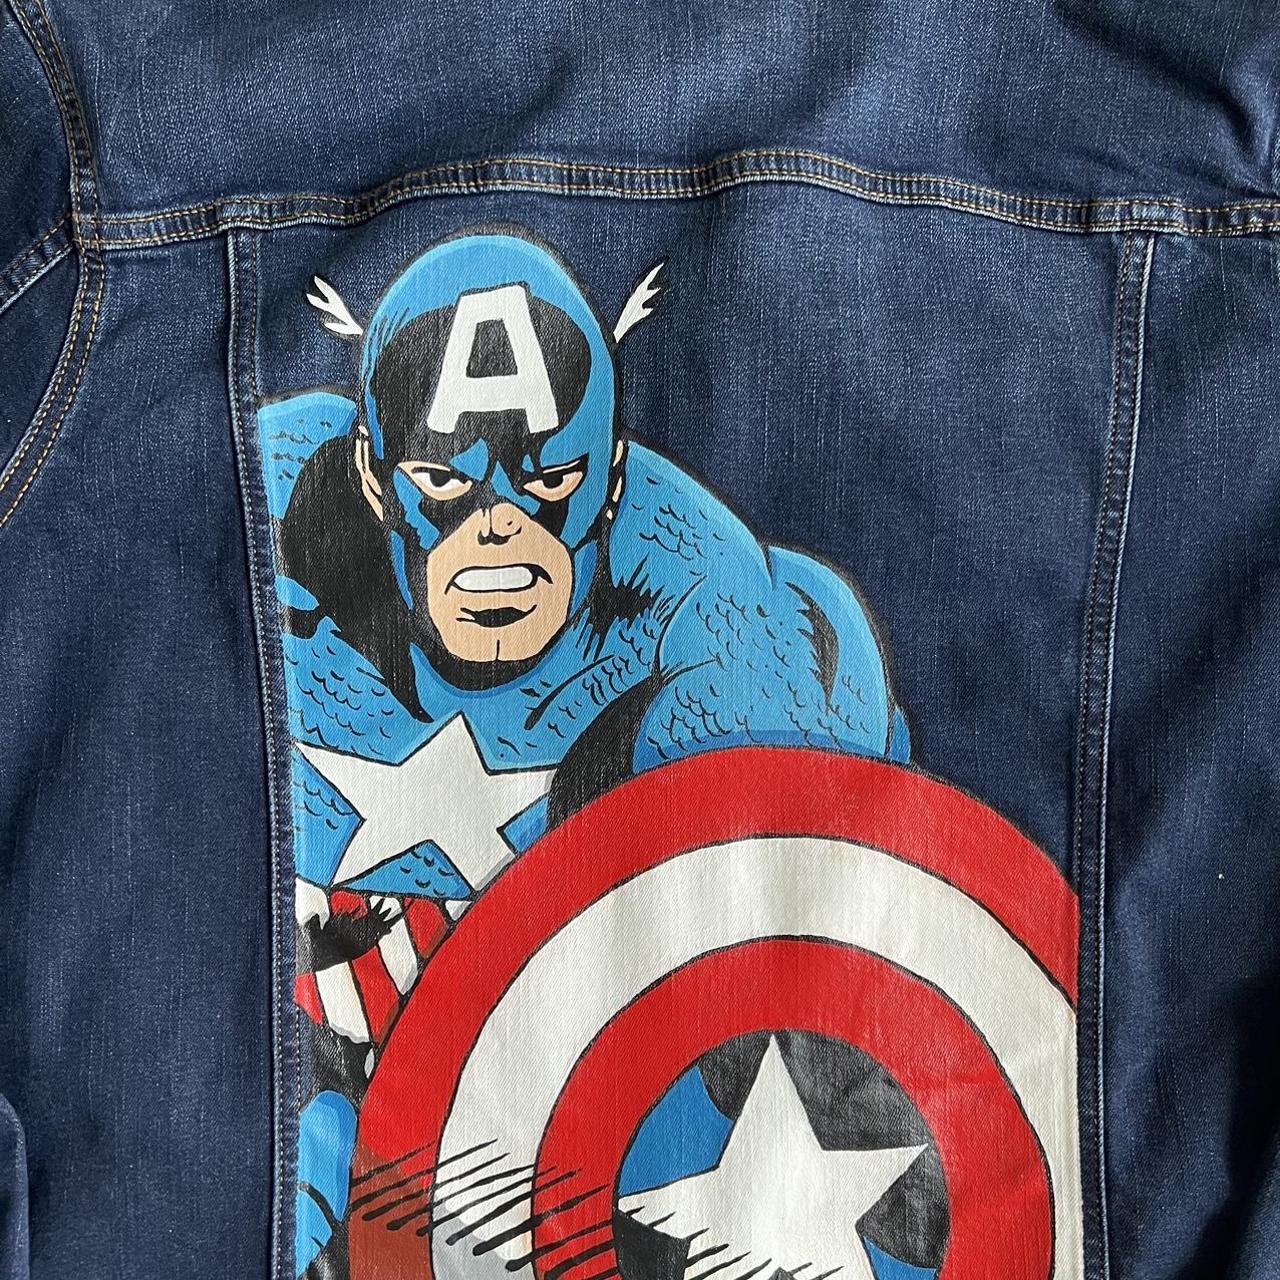 Personalised Custom Denim Jacket with Marvel Avengers | Custom denim jacket,  Custom jacket, Denim jacket patches